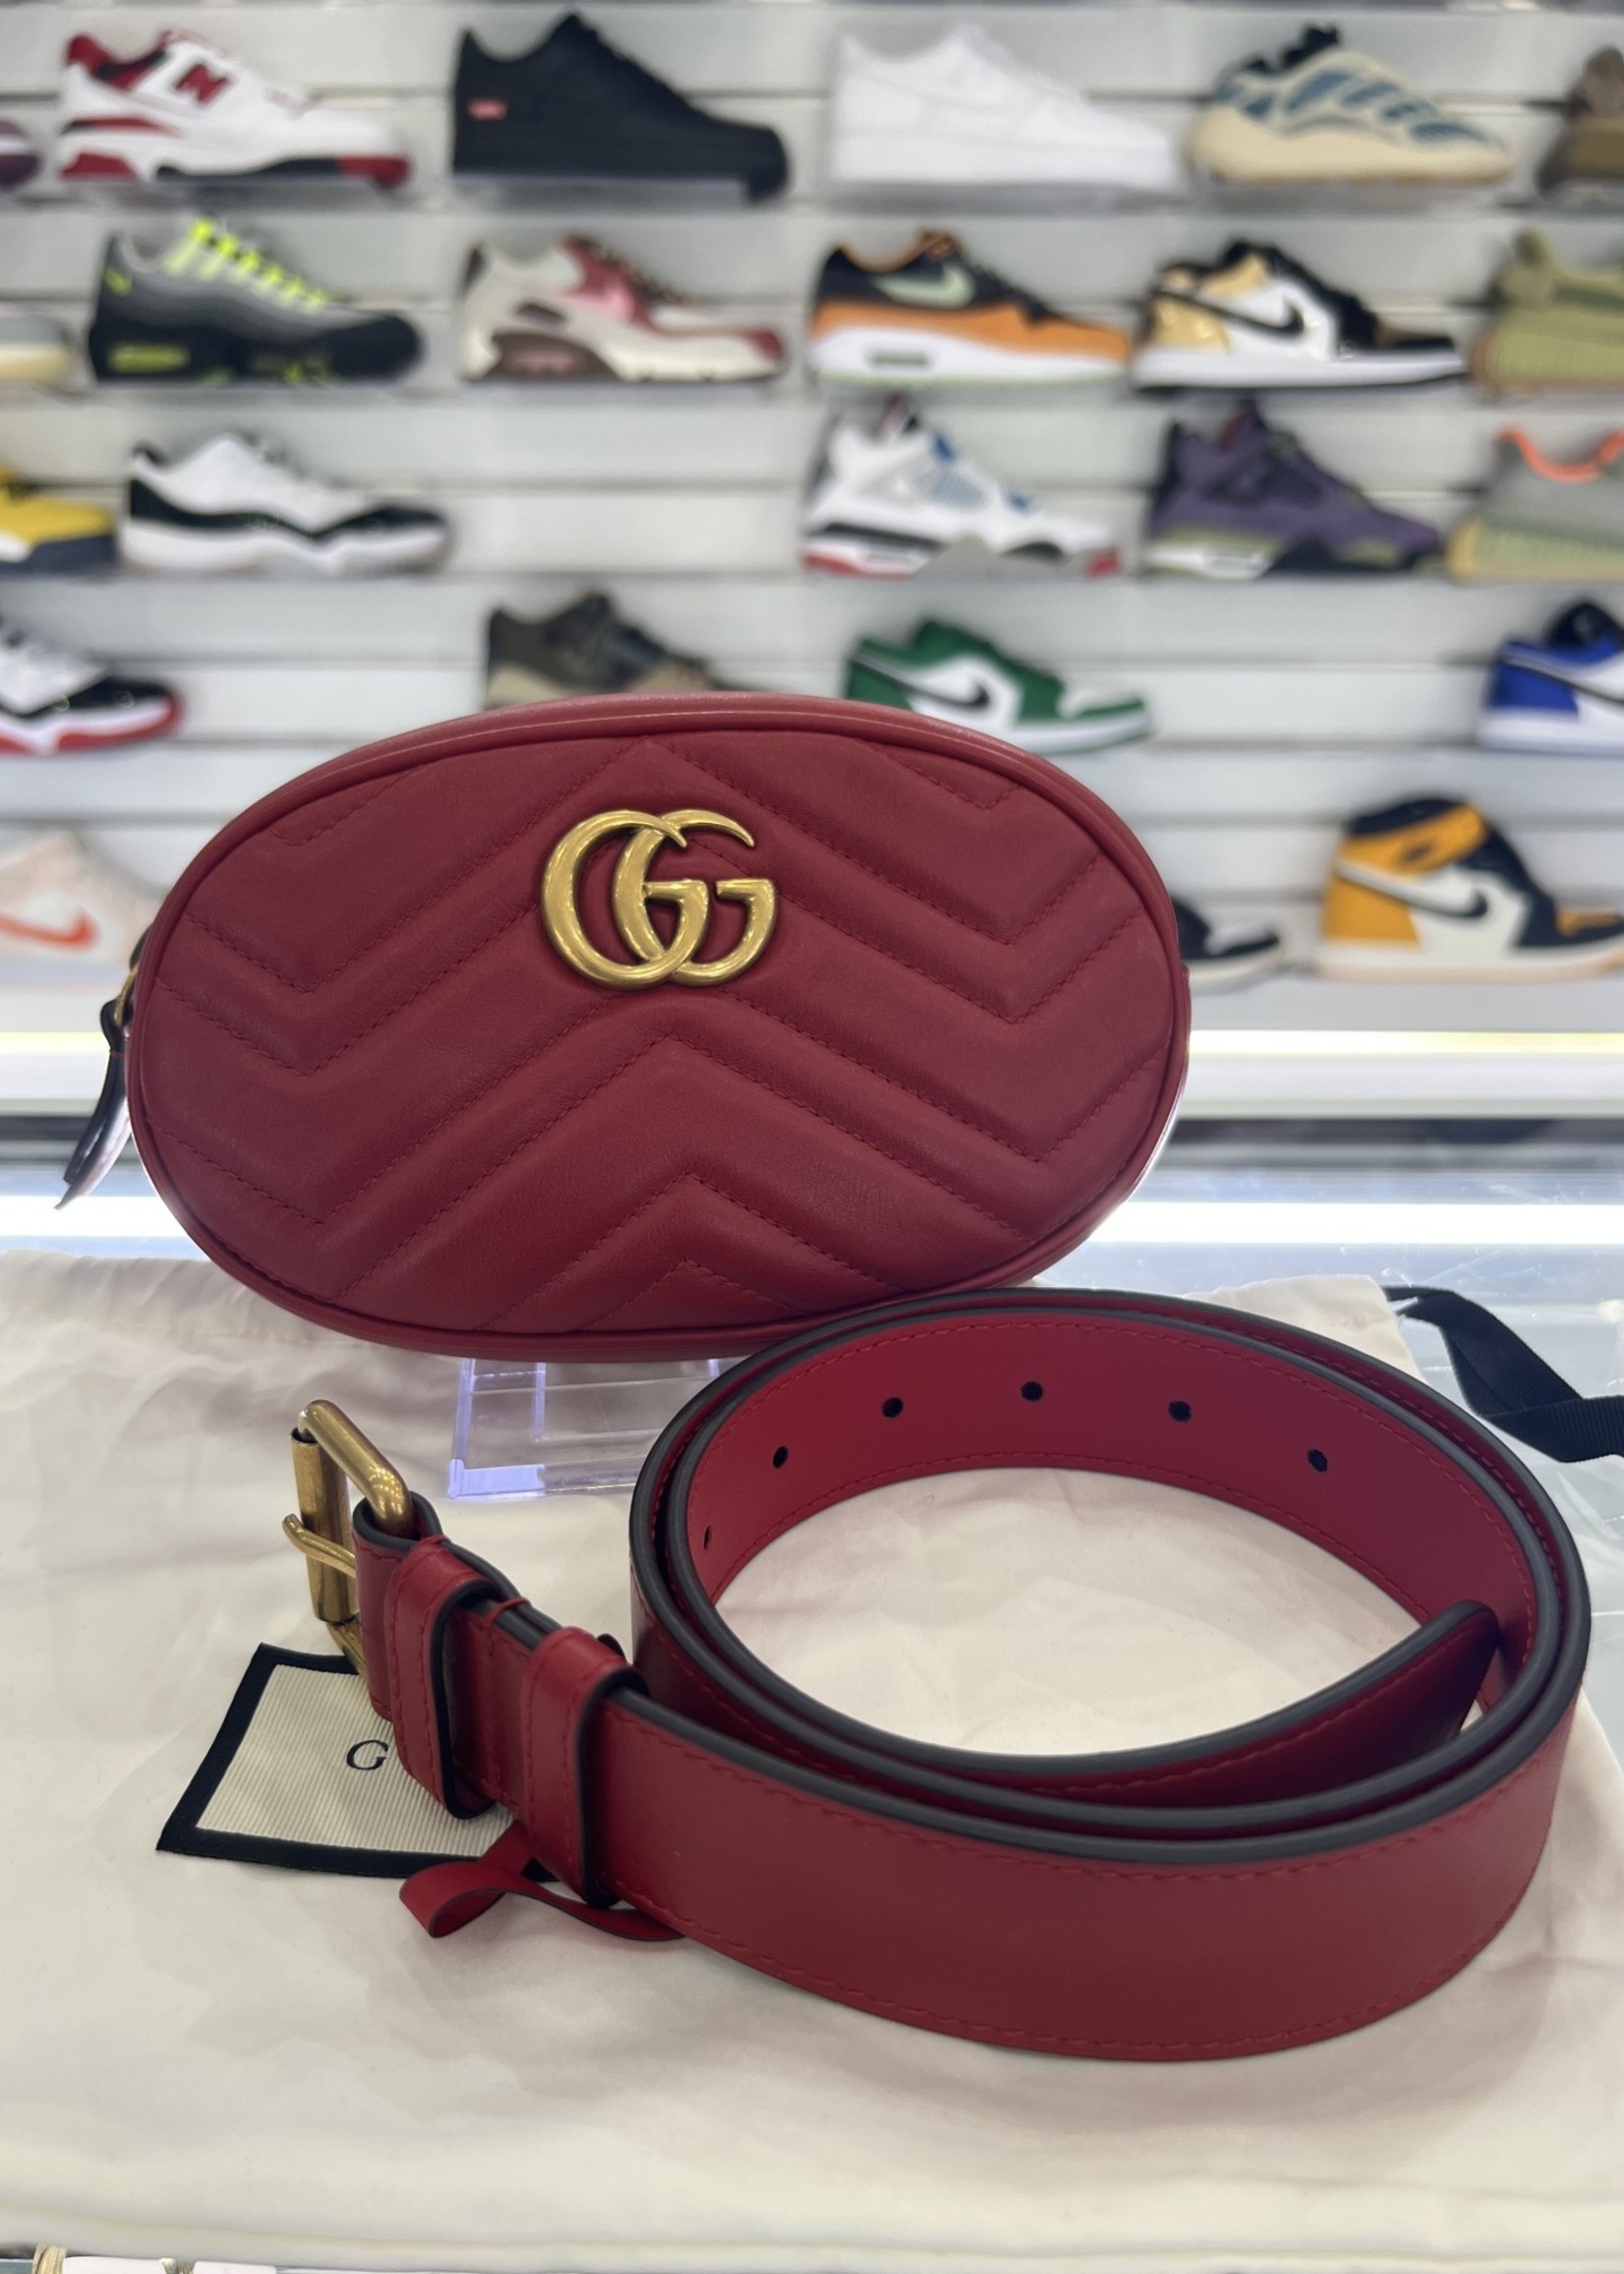 Gucci GUCCI BELT BAG RED LEATHER SIZE 75-30 - NEW